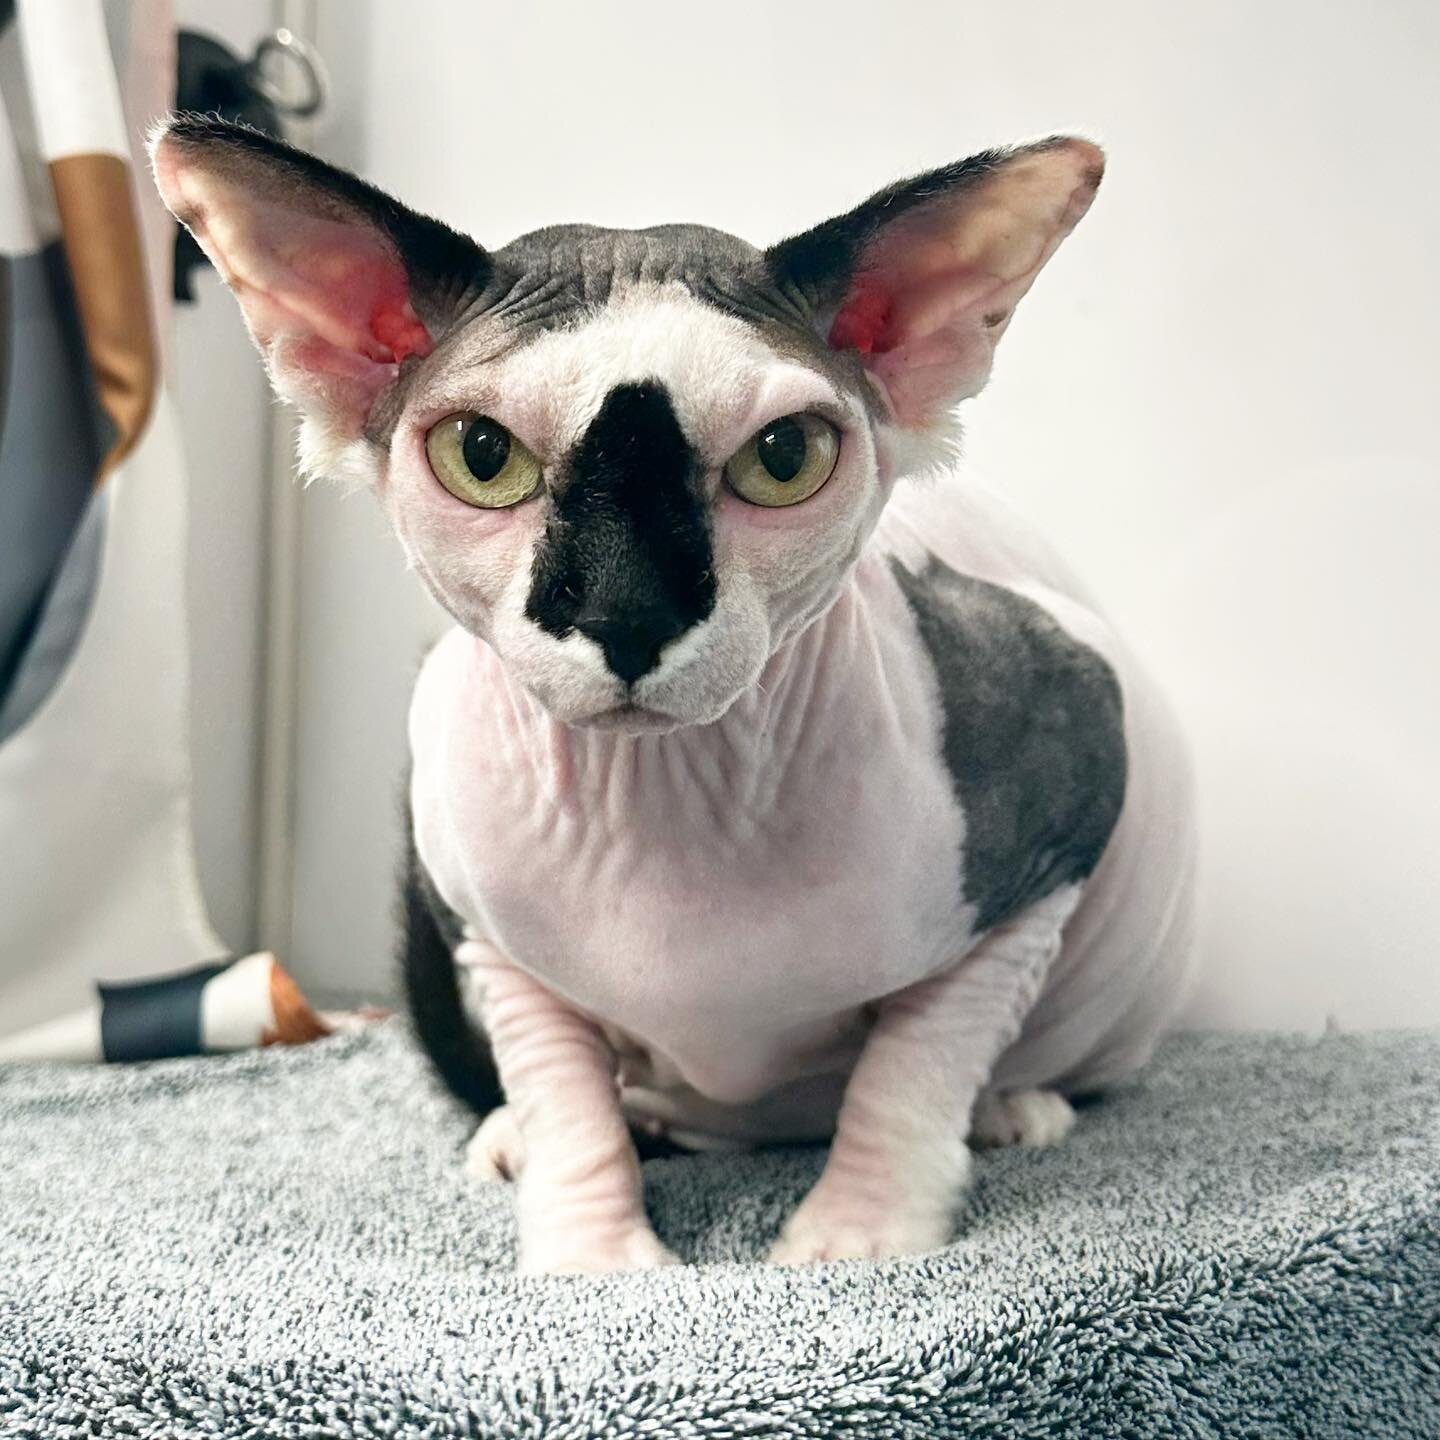 Mia the Sphynx 🐱 super wiggly and super dirty! Despite having very little fur, they are a very high maintenance breed when it comes to grooming, can you see the before/after differences of her skin and ears before and after her bath? #catgrooming #c